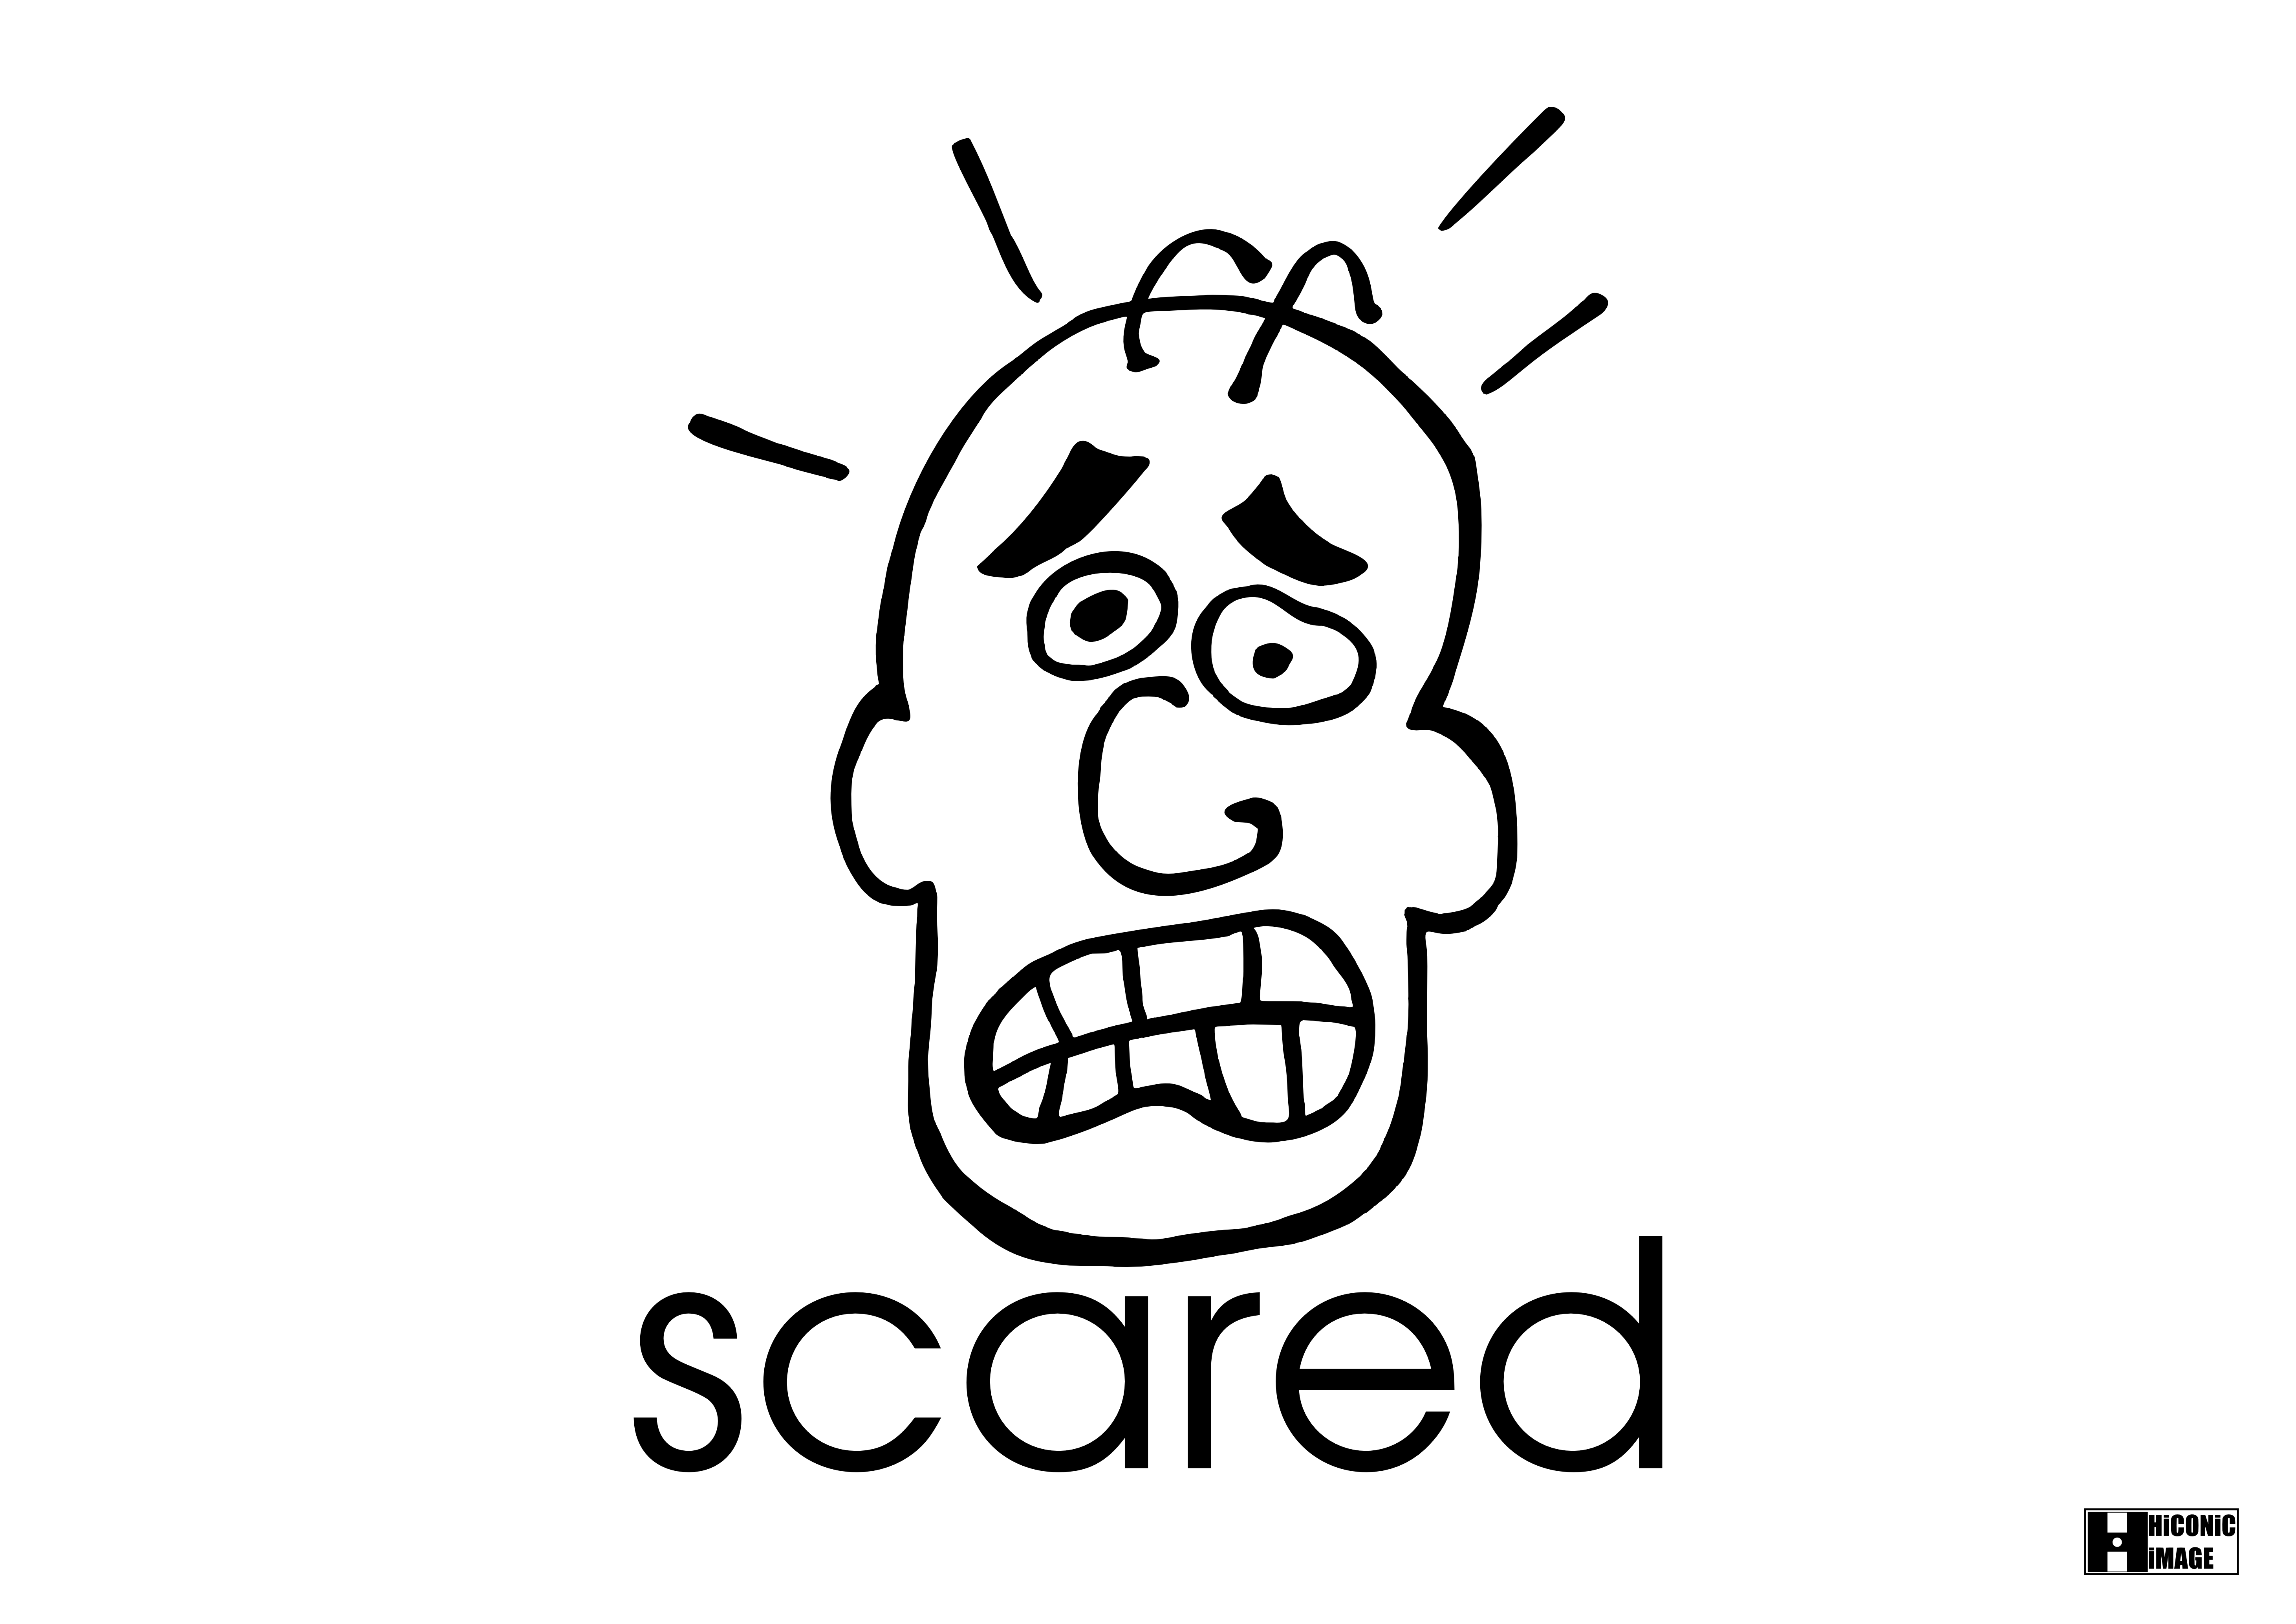 Scare frighten. Scared. Scared картинка. Scared раскраска. Happy Sad Angry scared картинки для детей.